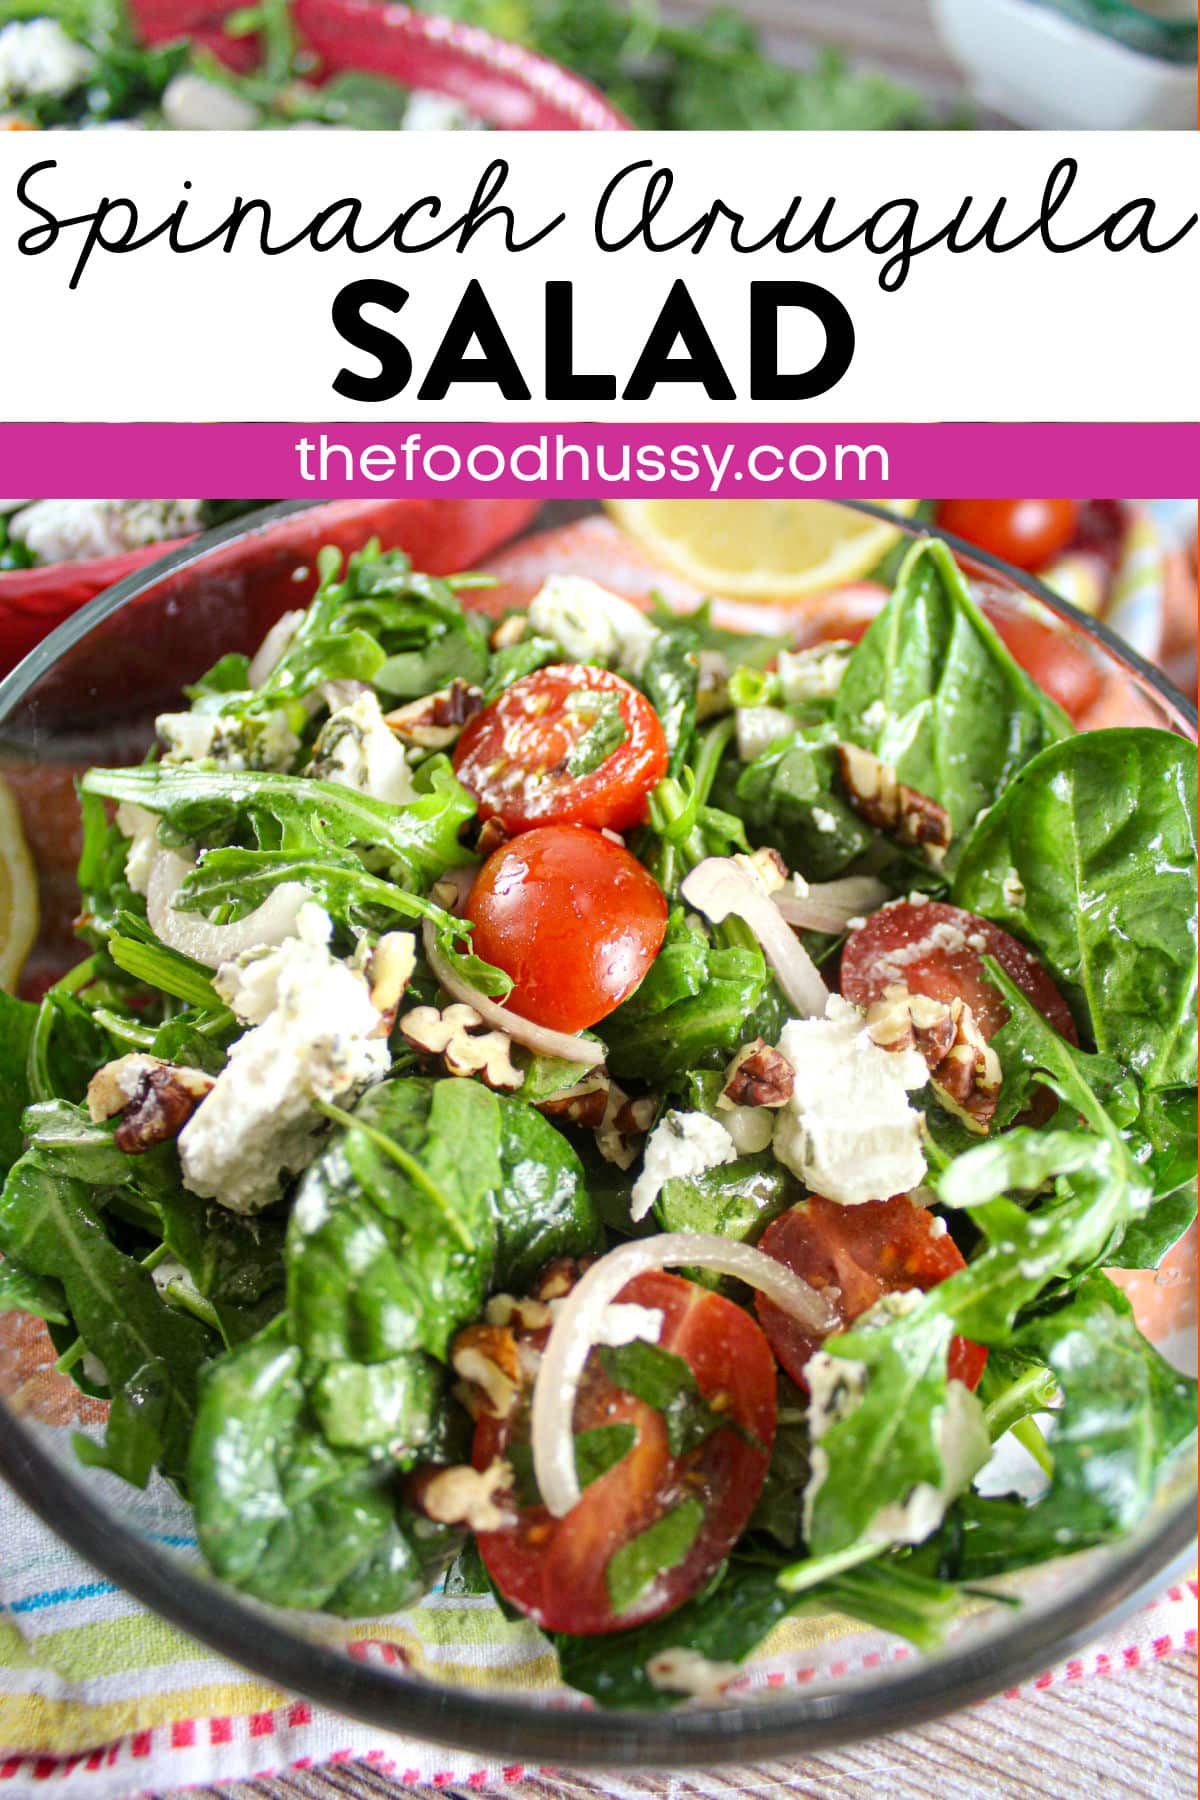 This Spinach Arugula Salad is light, creamy and crunchy with a delicious honey dijon vinaigrette. The spinach and arugula are topped with shallots, cherry tomatoes, creamy goat cheese and pecans!  via @foodhussy